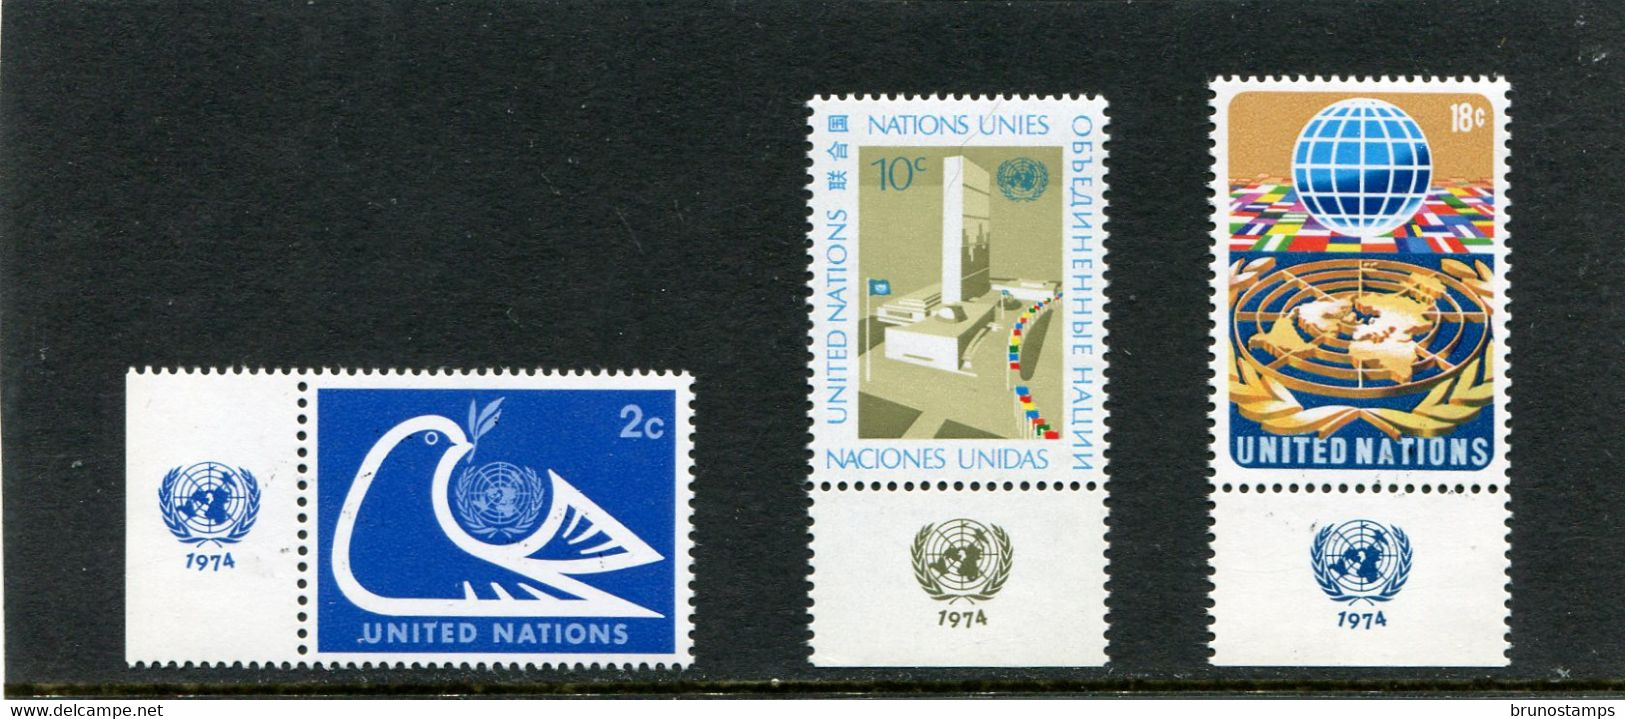 UNITED NATIONS - NEW YORK   - 1974  DEFINITIVE   SET  WITH TABS  MINT NH - Ongebruikt